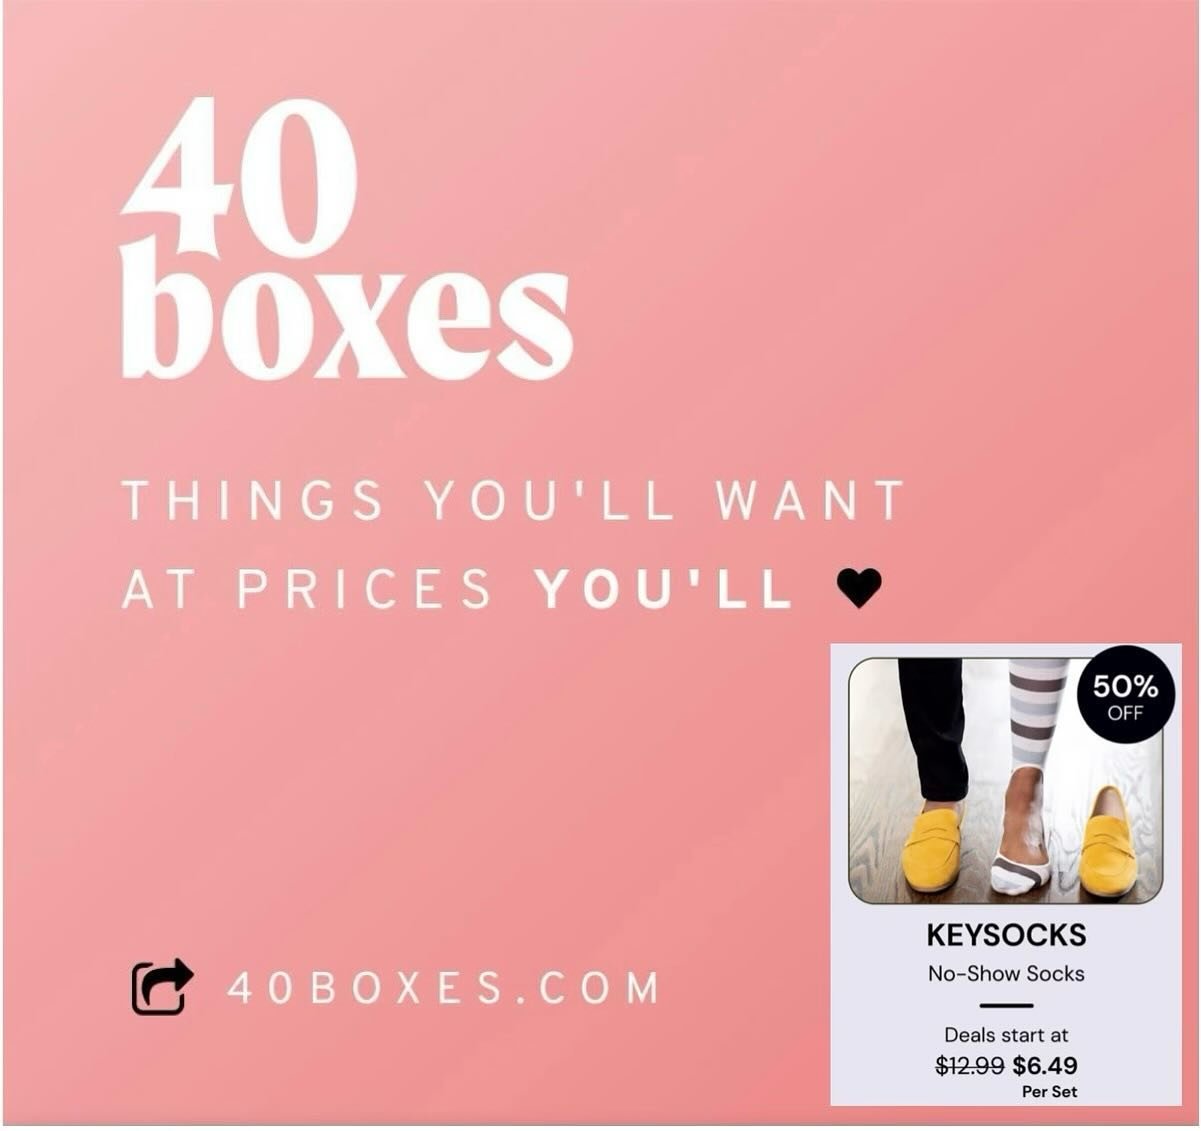 We&rsquo;re so excited to be featured on @40boxes 📦 Now is the time to SHOP and SAVE 50% off on Keysocks 🗝 Make sure to check out @toryjohnson site #40boxes 🩷Things you&rsquo;ll want at prices you&rsquo;ll love 🩷 Shop Link in Bio 🛒 

#keysocks #